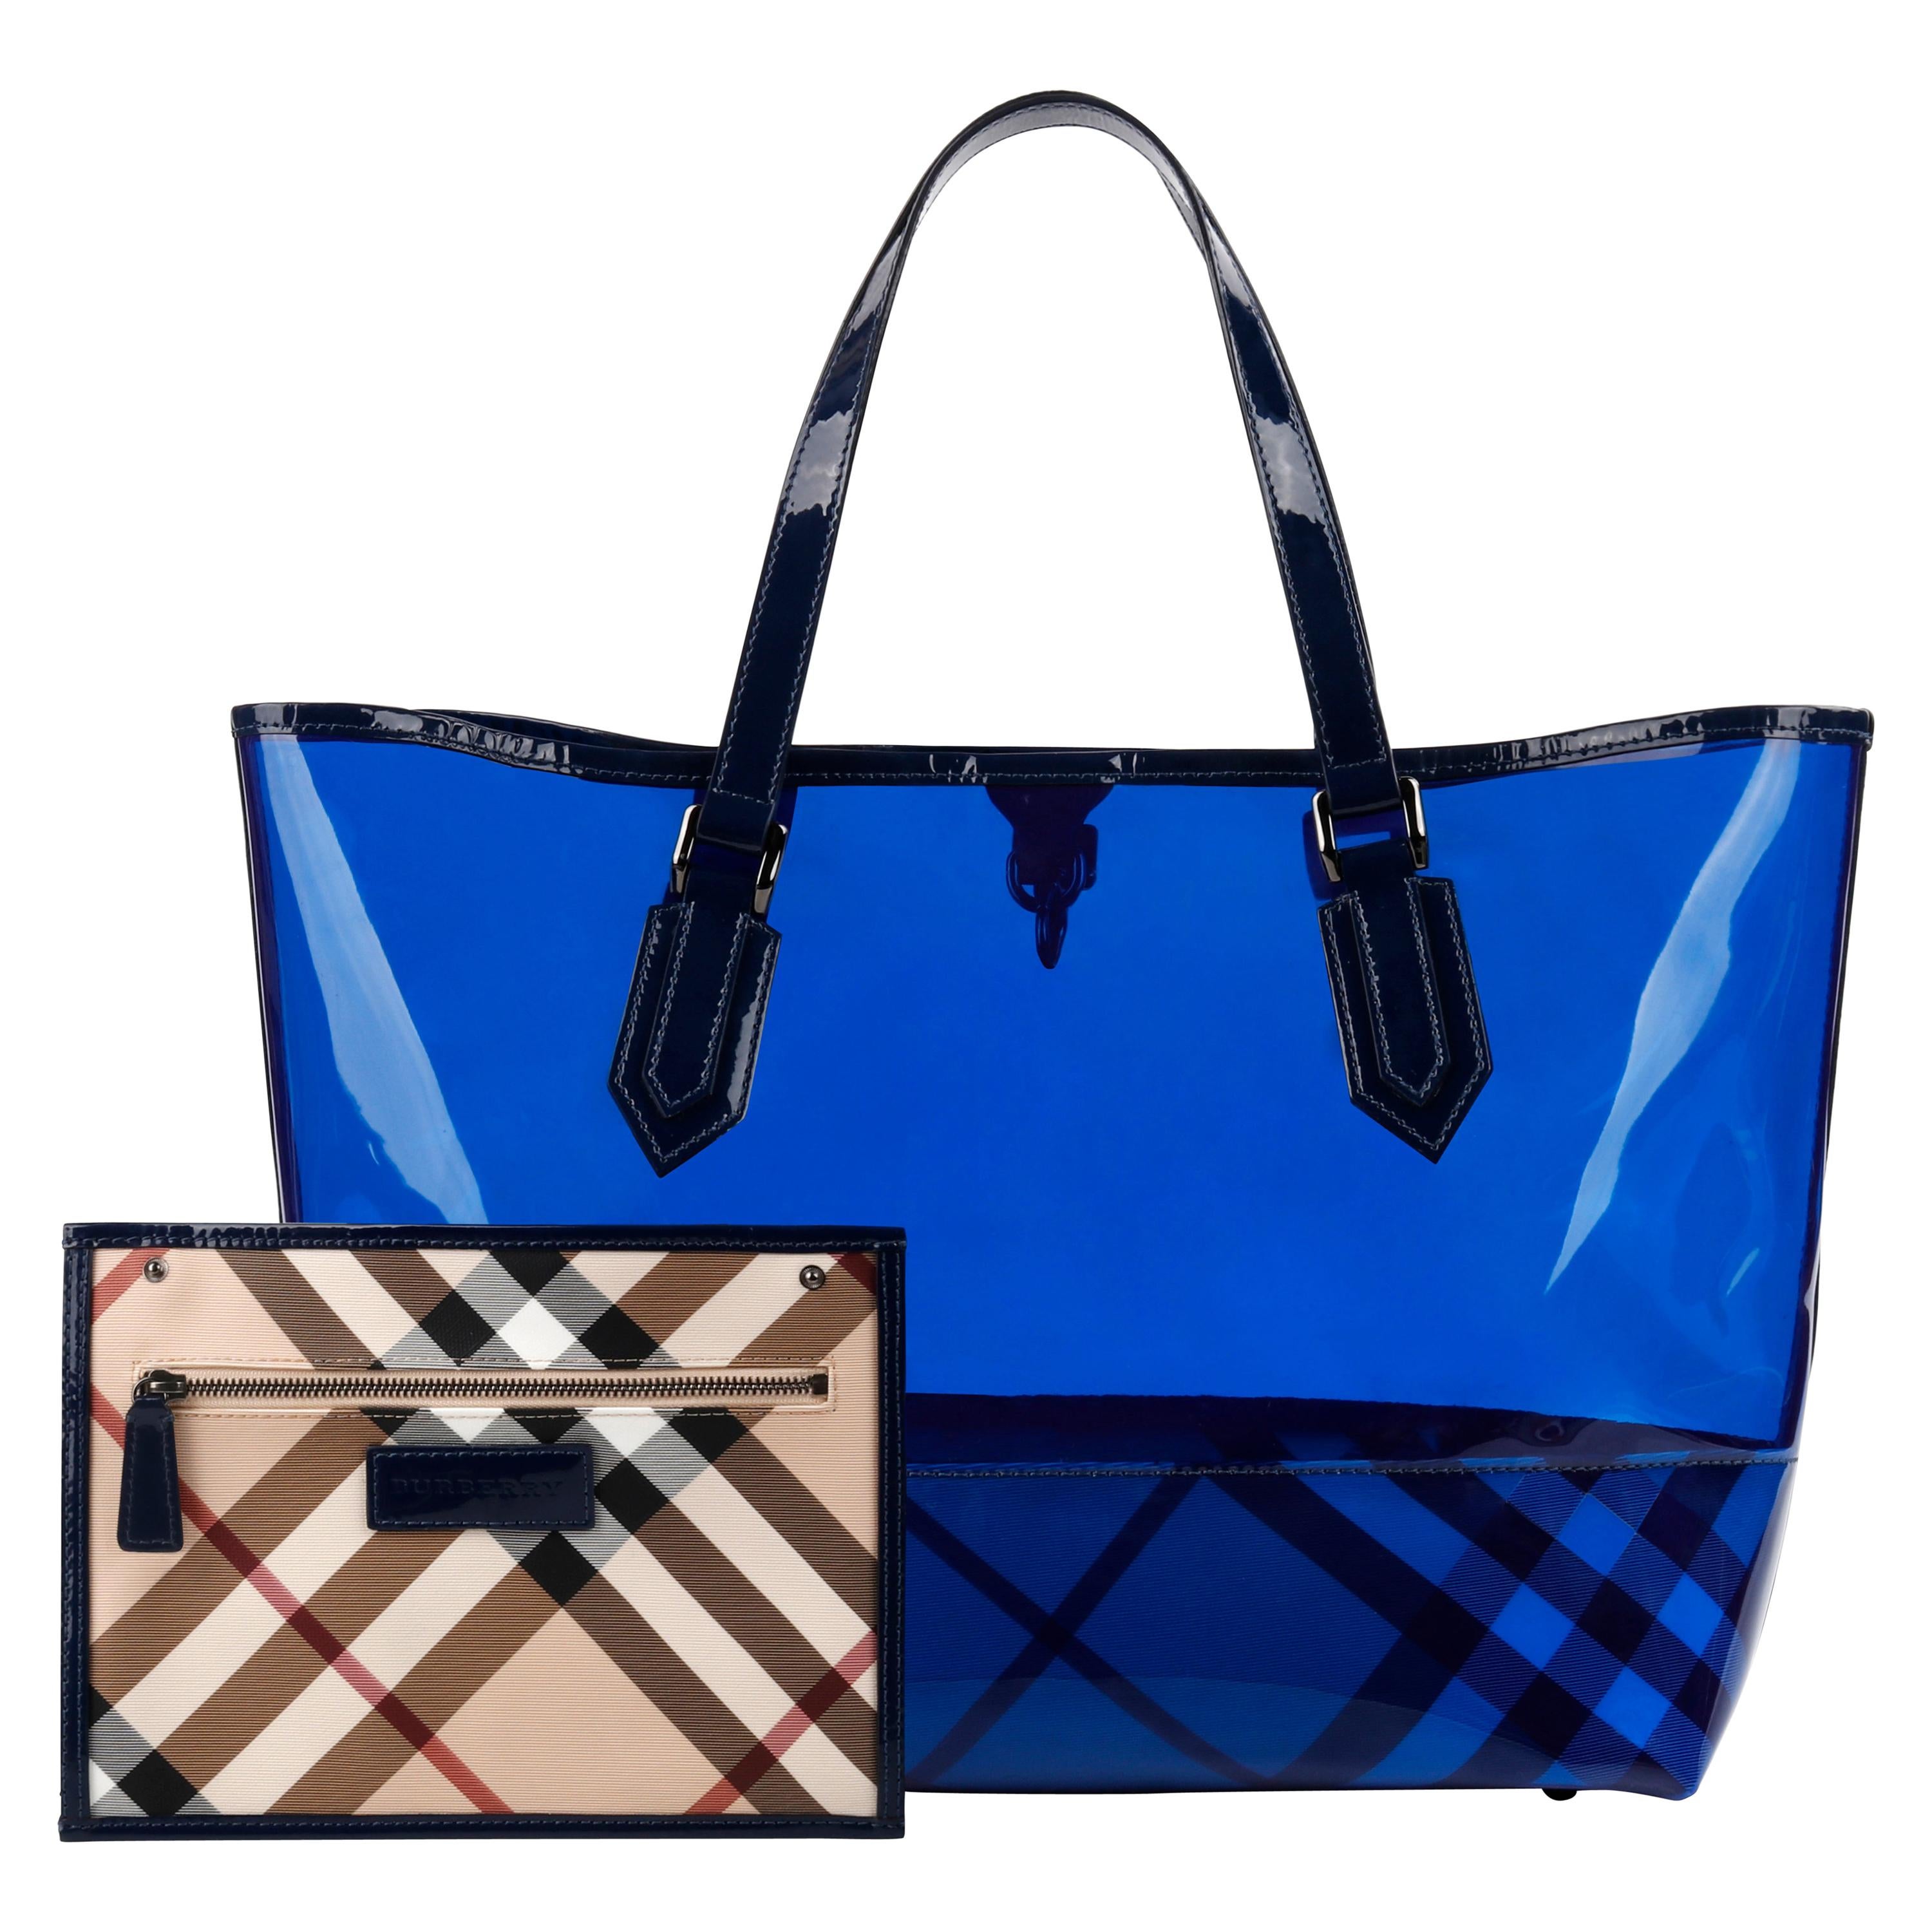 BURBERRY “All Over Perspex” Jet Blue Transparent PVC Tote Bag + Pouch